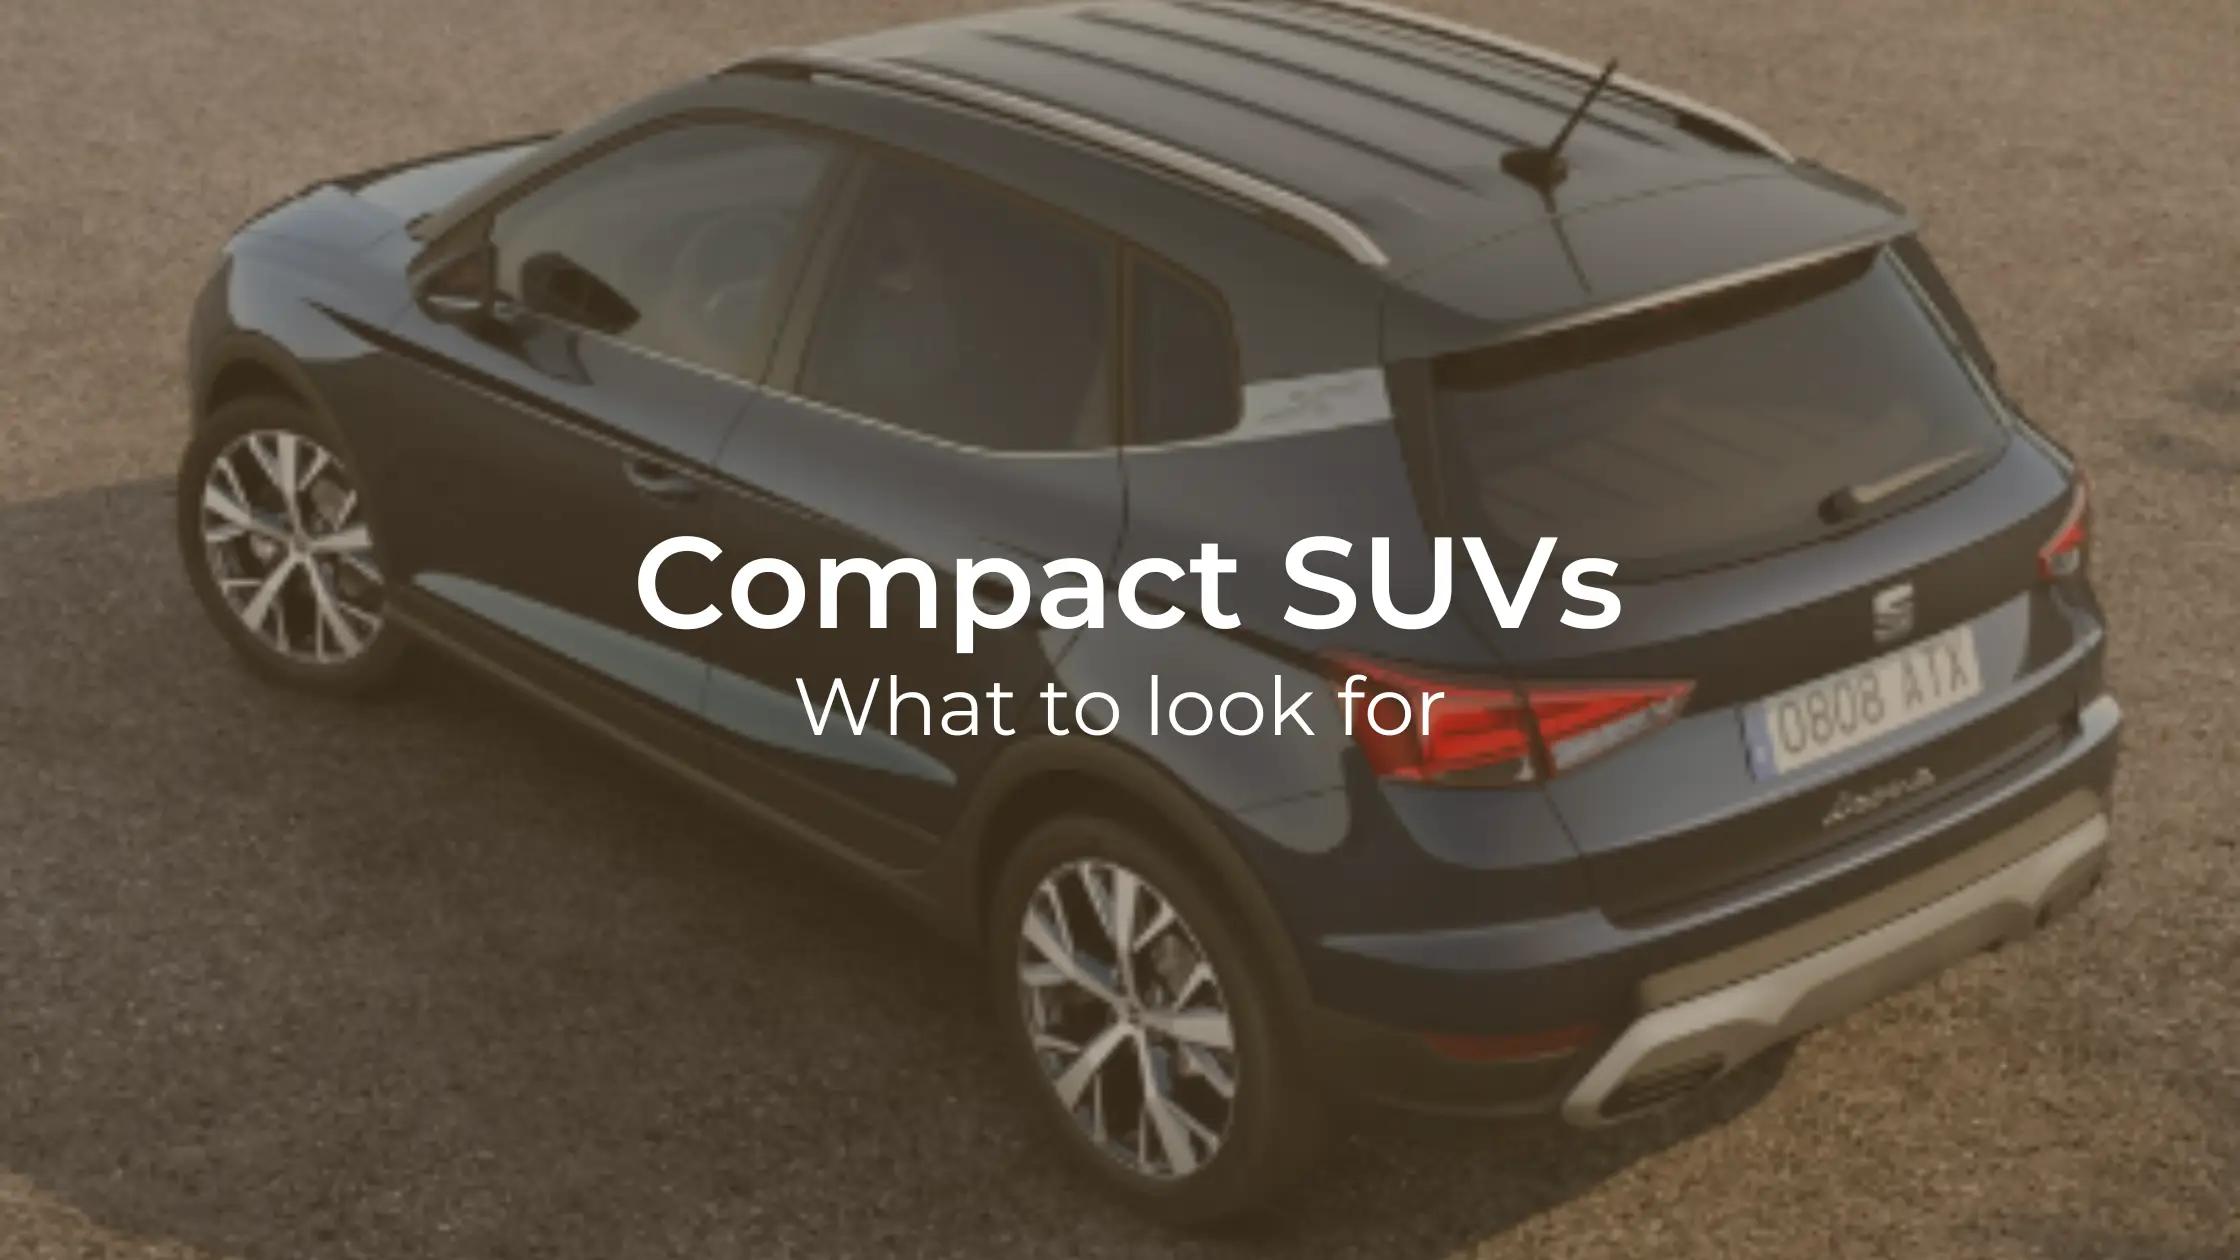 Compact SUVs - What to Look For